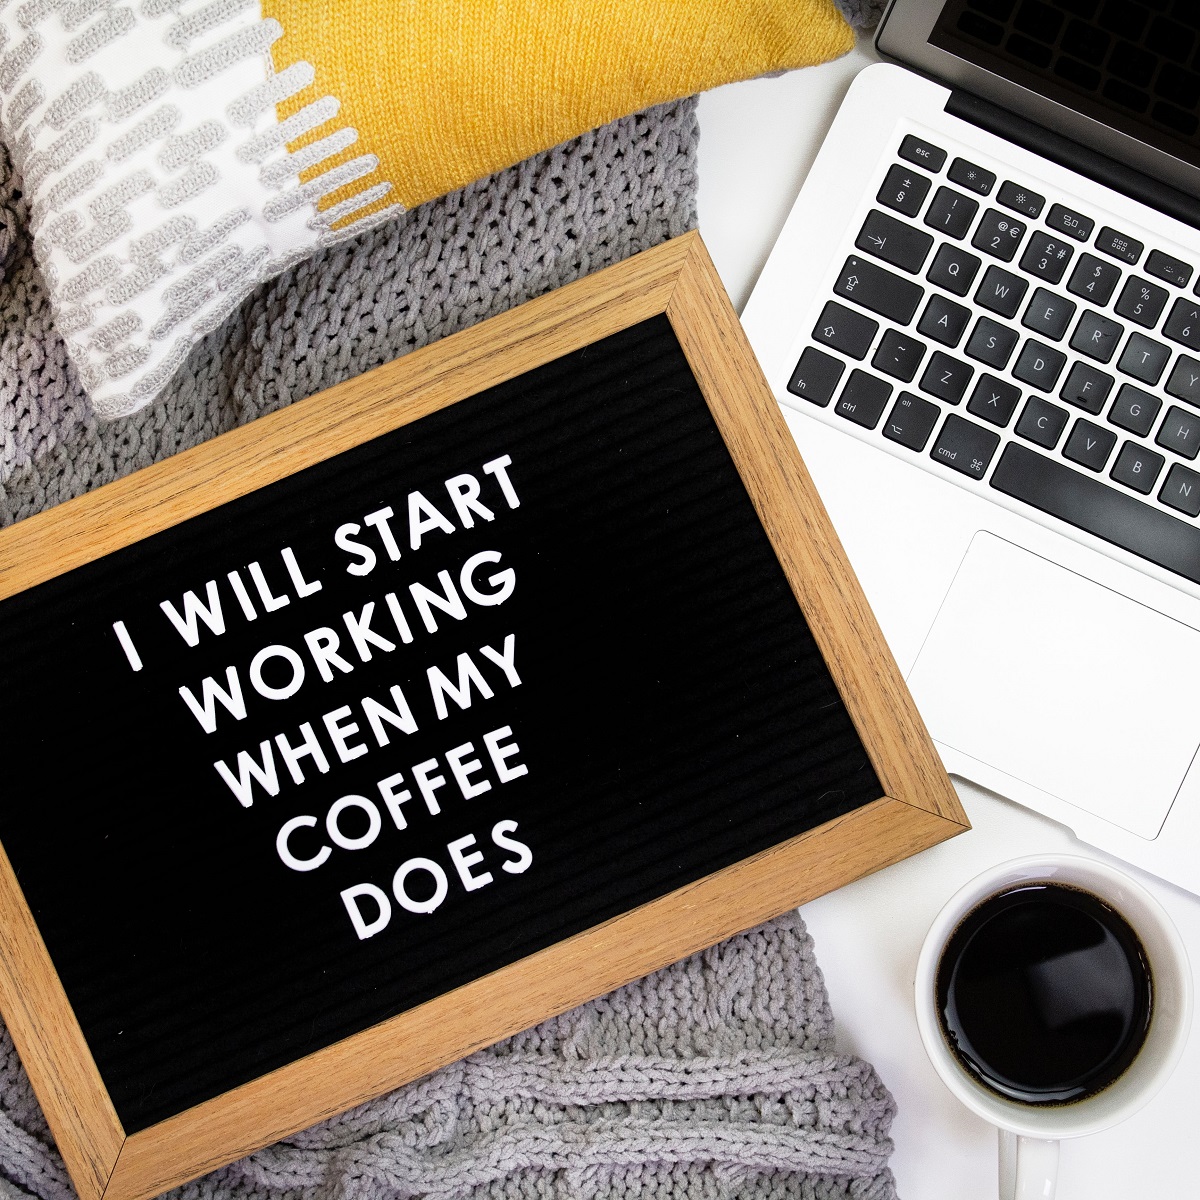 Sign post: I will start working when my coffee does